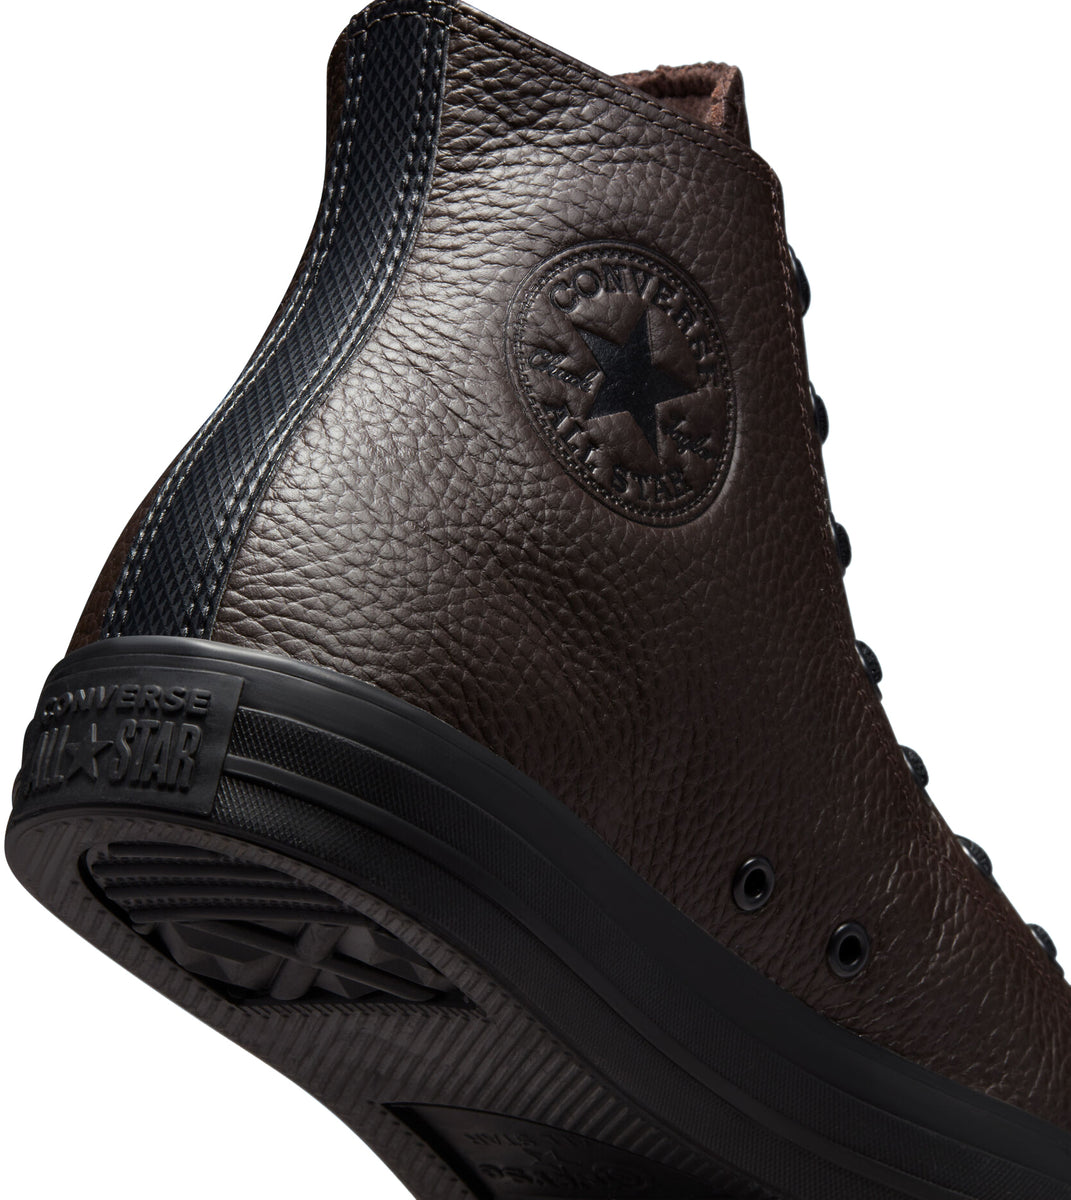 Converse Chuck Taylor Leather - brown 